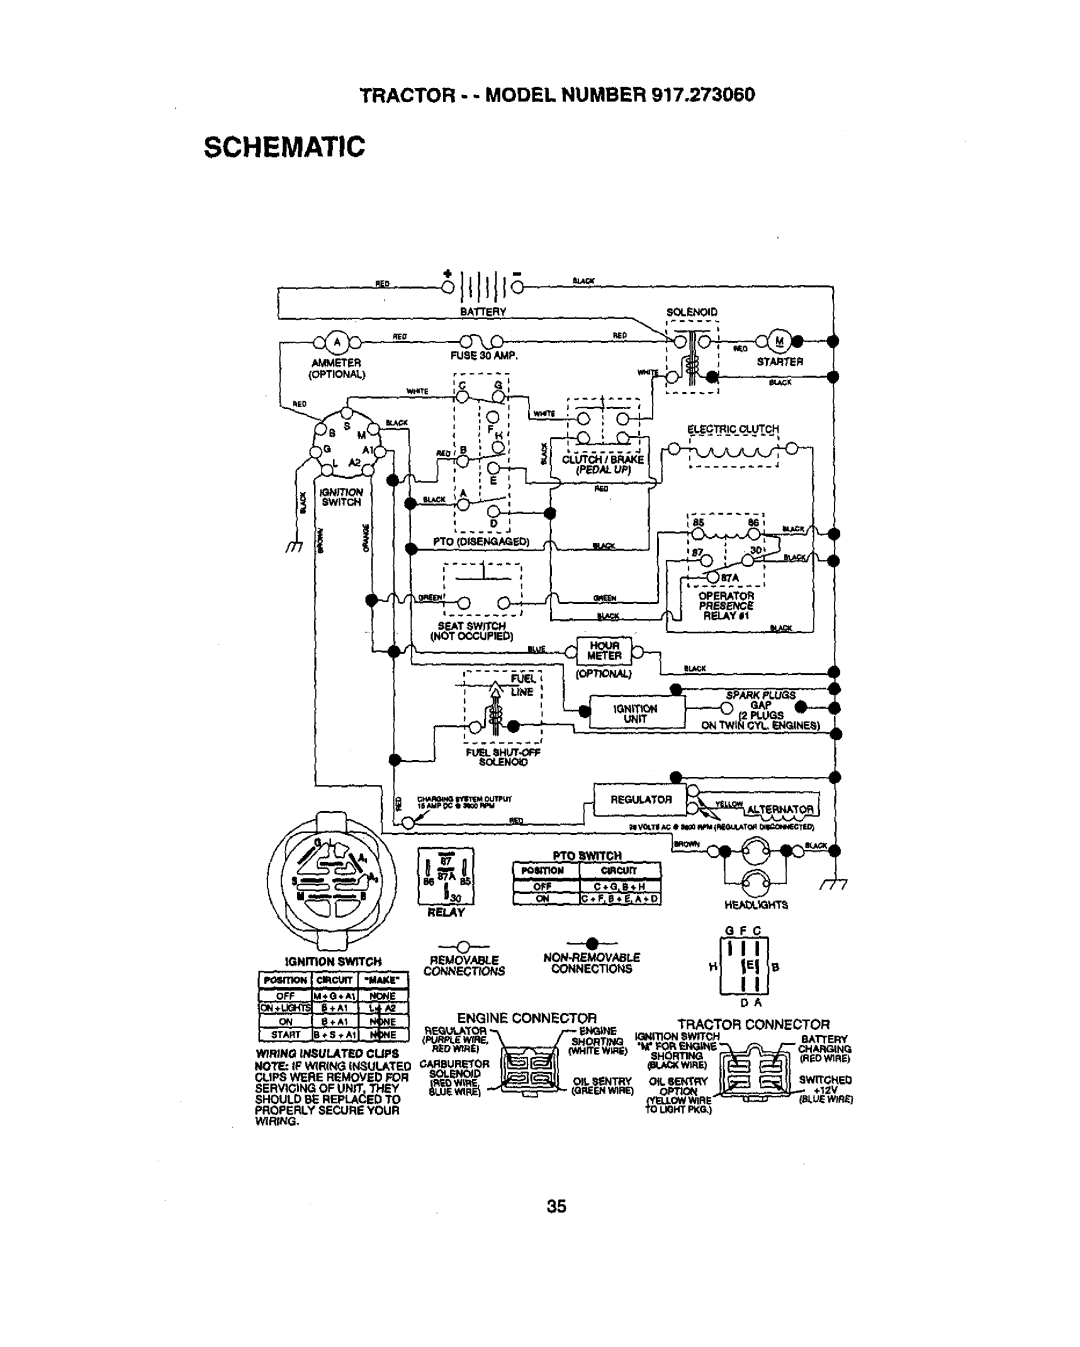 Craftsman 917.27306 owner manual Schematic, R_J_IOyA_._, Non.R¢_Movable, I_at, W_R_ 